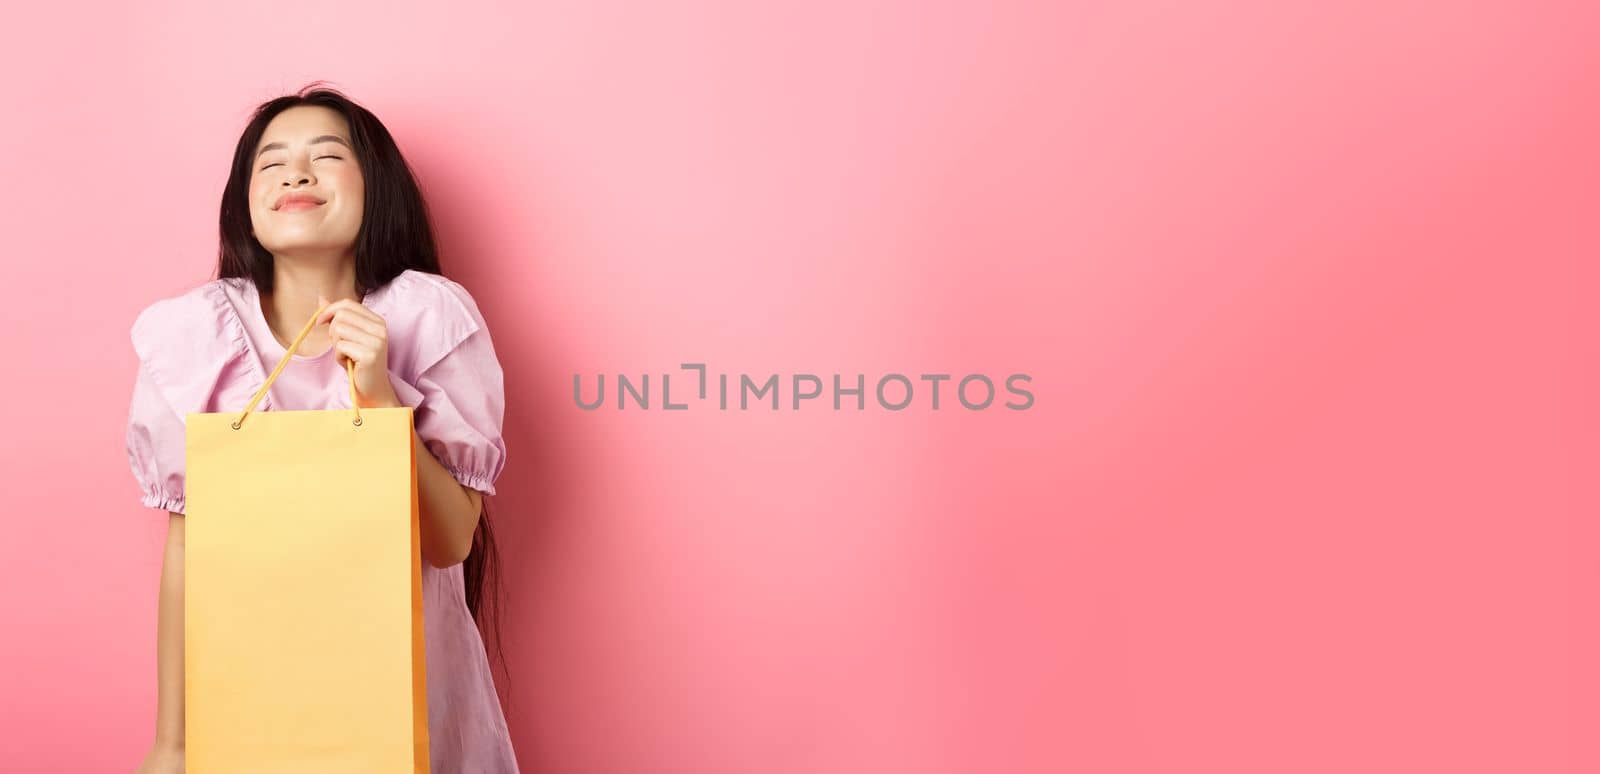 Beautiful happy asian woman holding shopping bag, smiling with eyes closed, standing in dress against pink background.